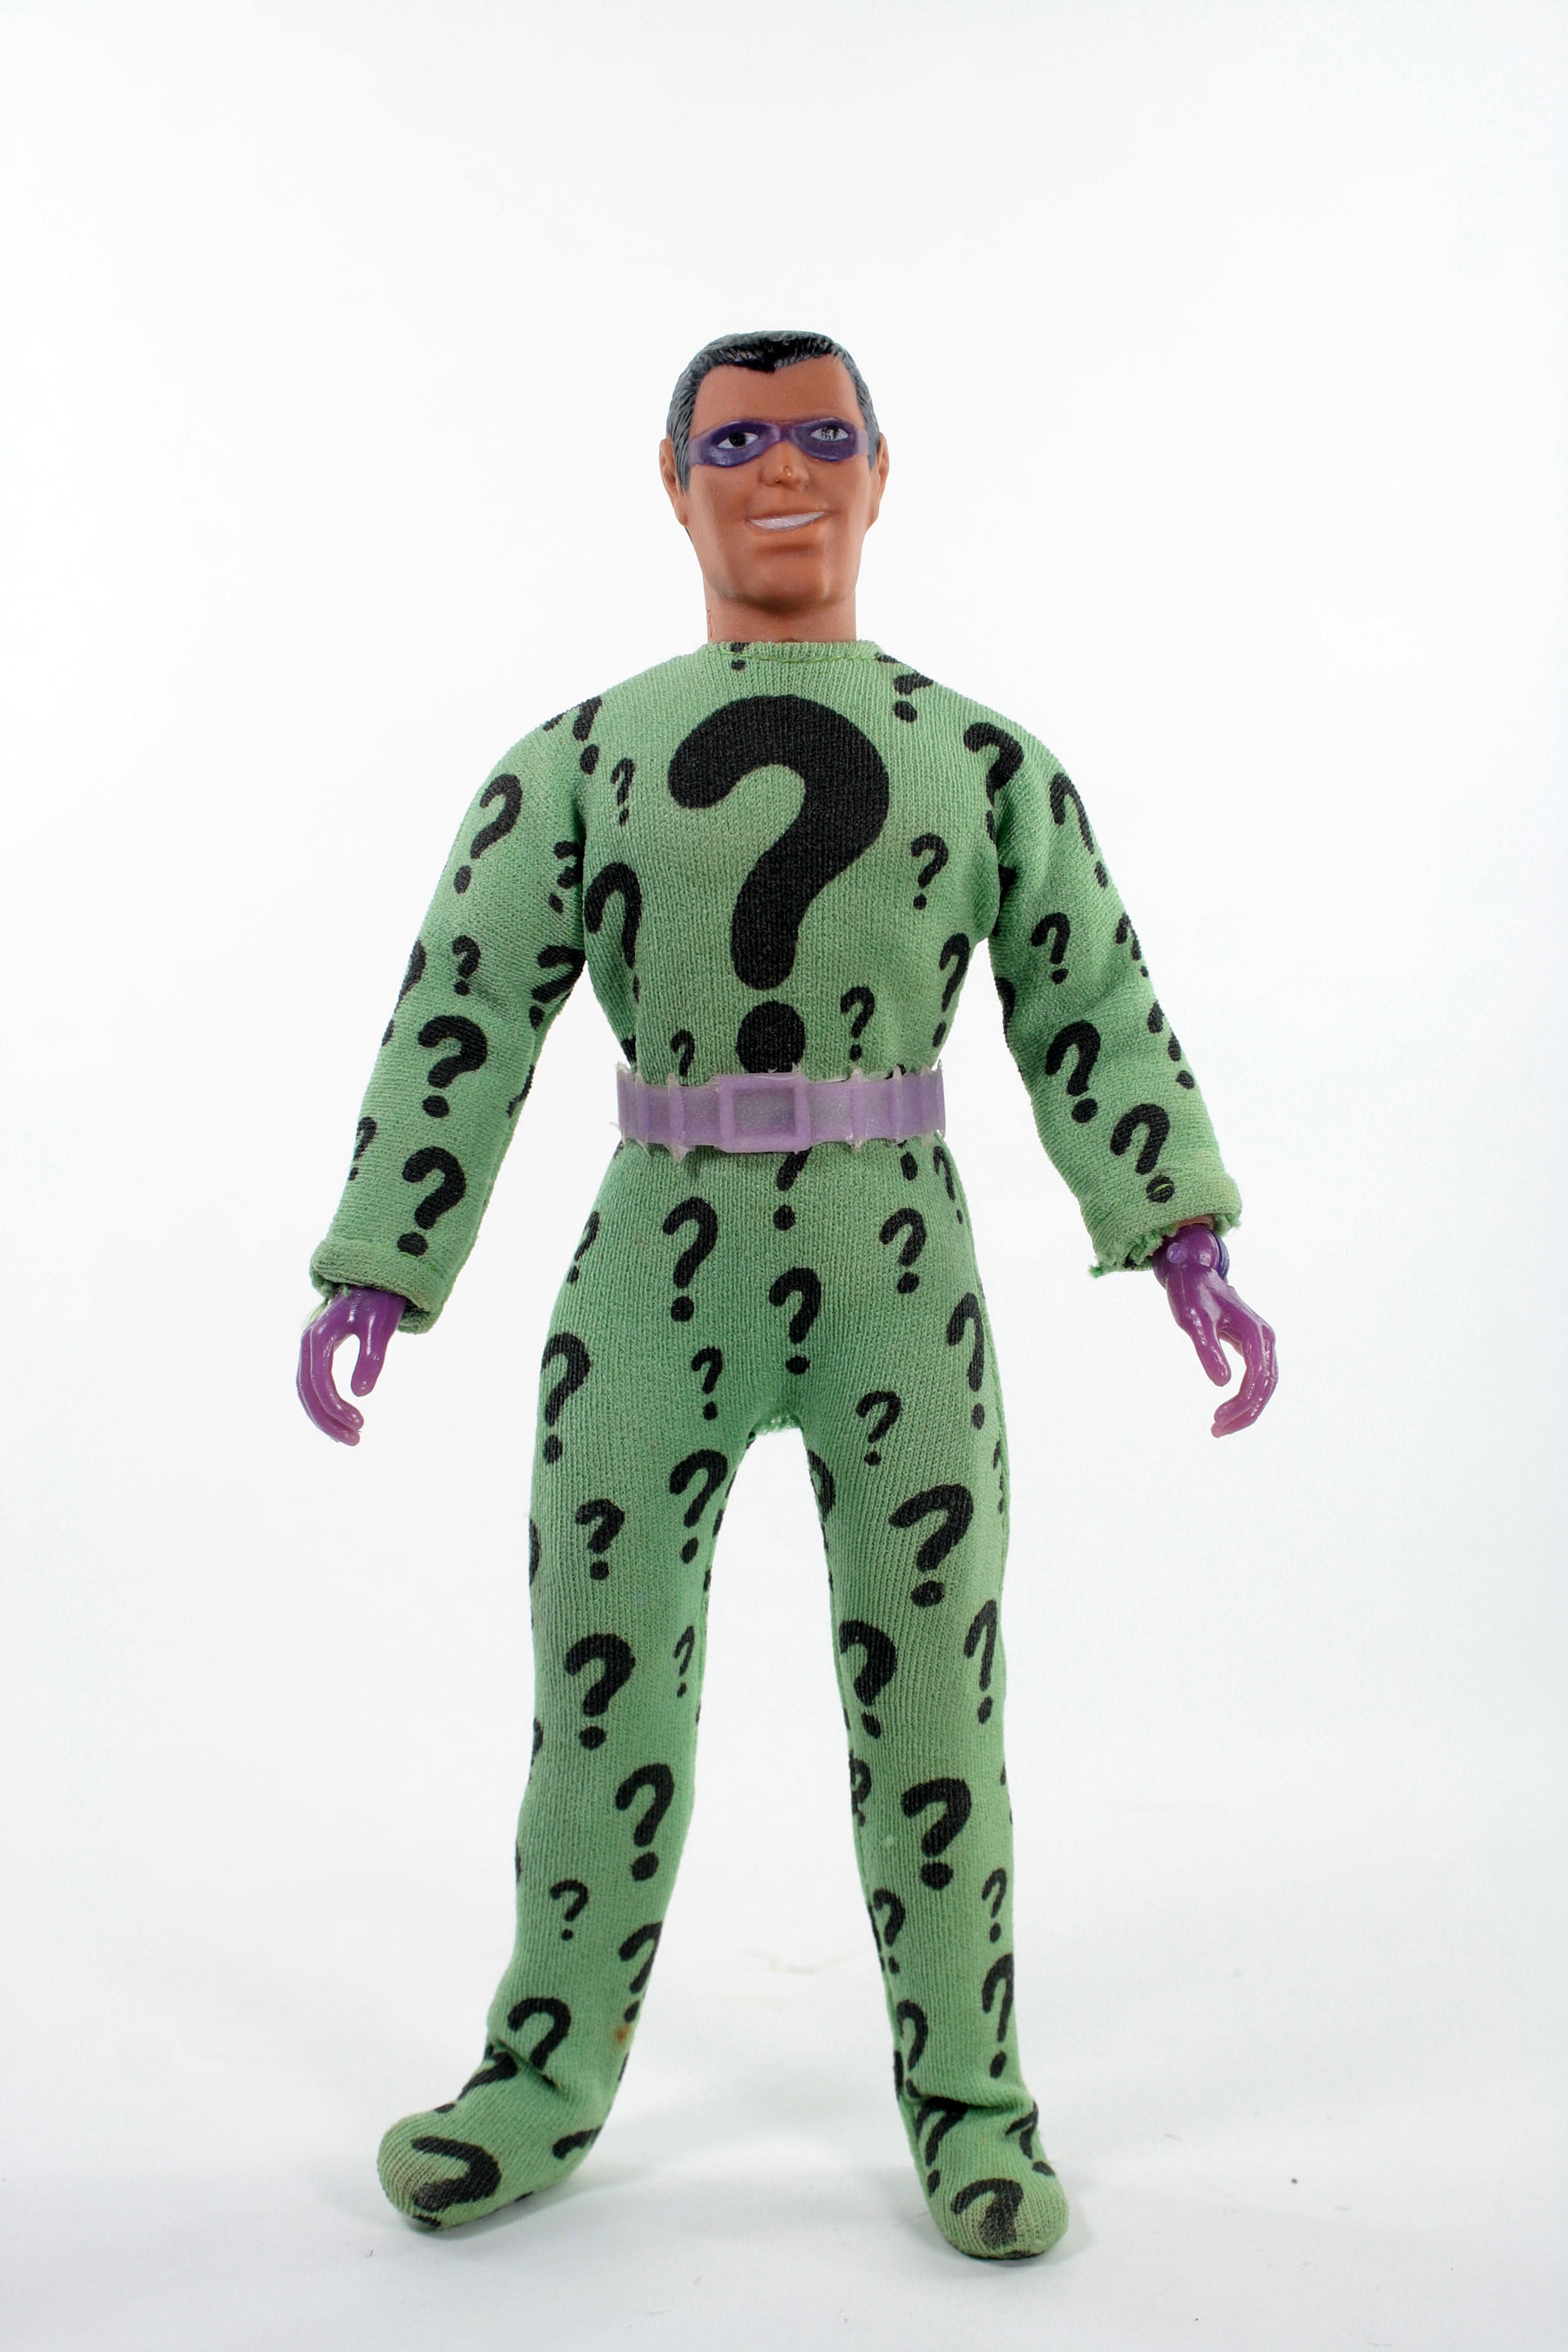 Mego Wave 17 - Riddler 50th Anniversary World's Greatest Superheroes (Classic Box) 8" Action Figure